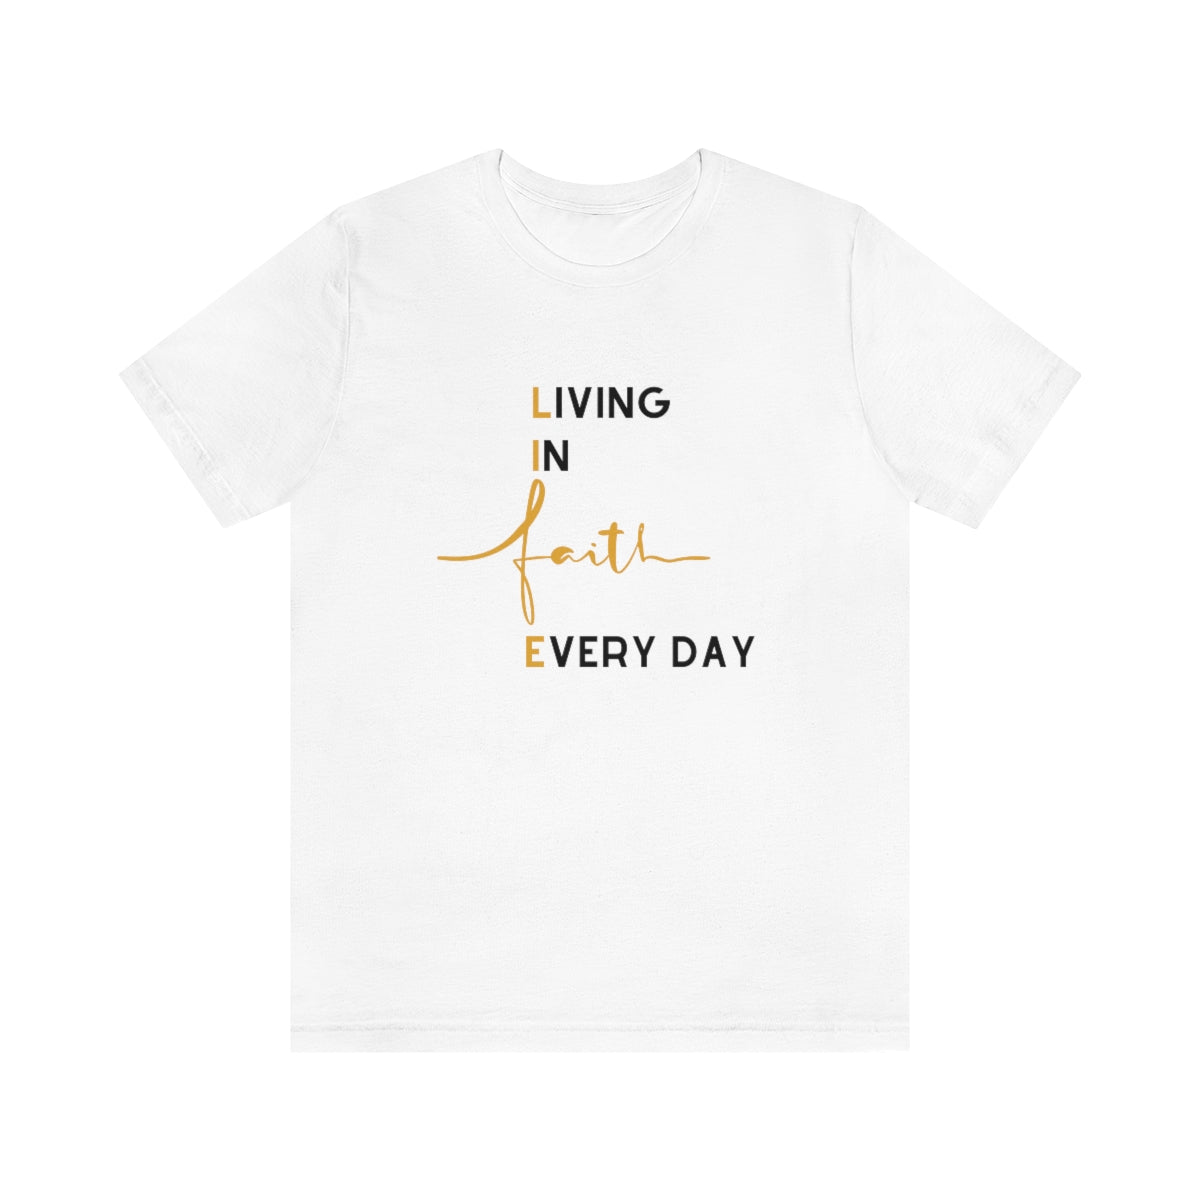 LIFE: LIVING IN FAITH EVERY DAY T-SHIRT-T-Shirt-White-S-mysticalcherry